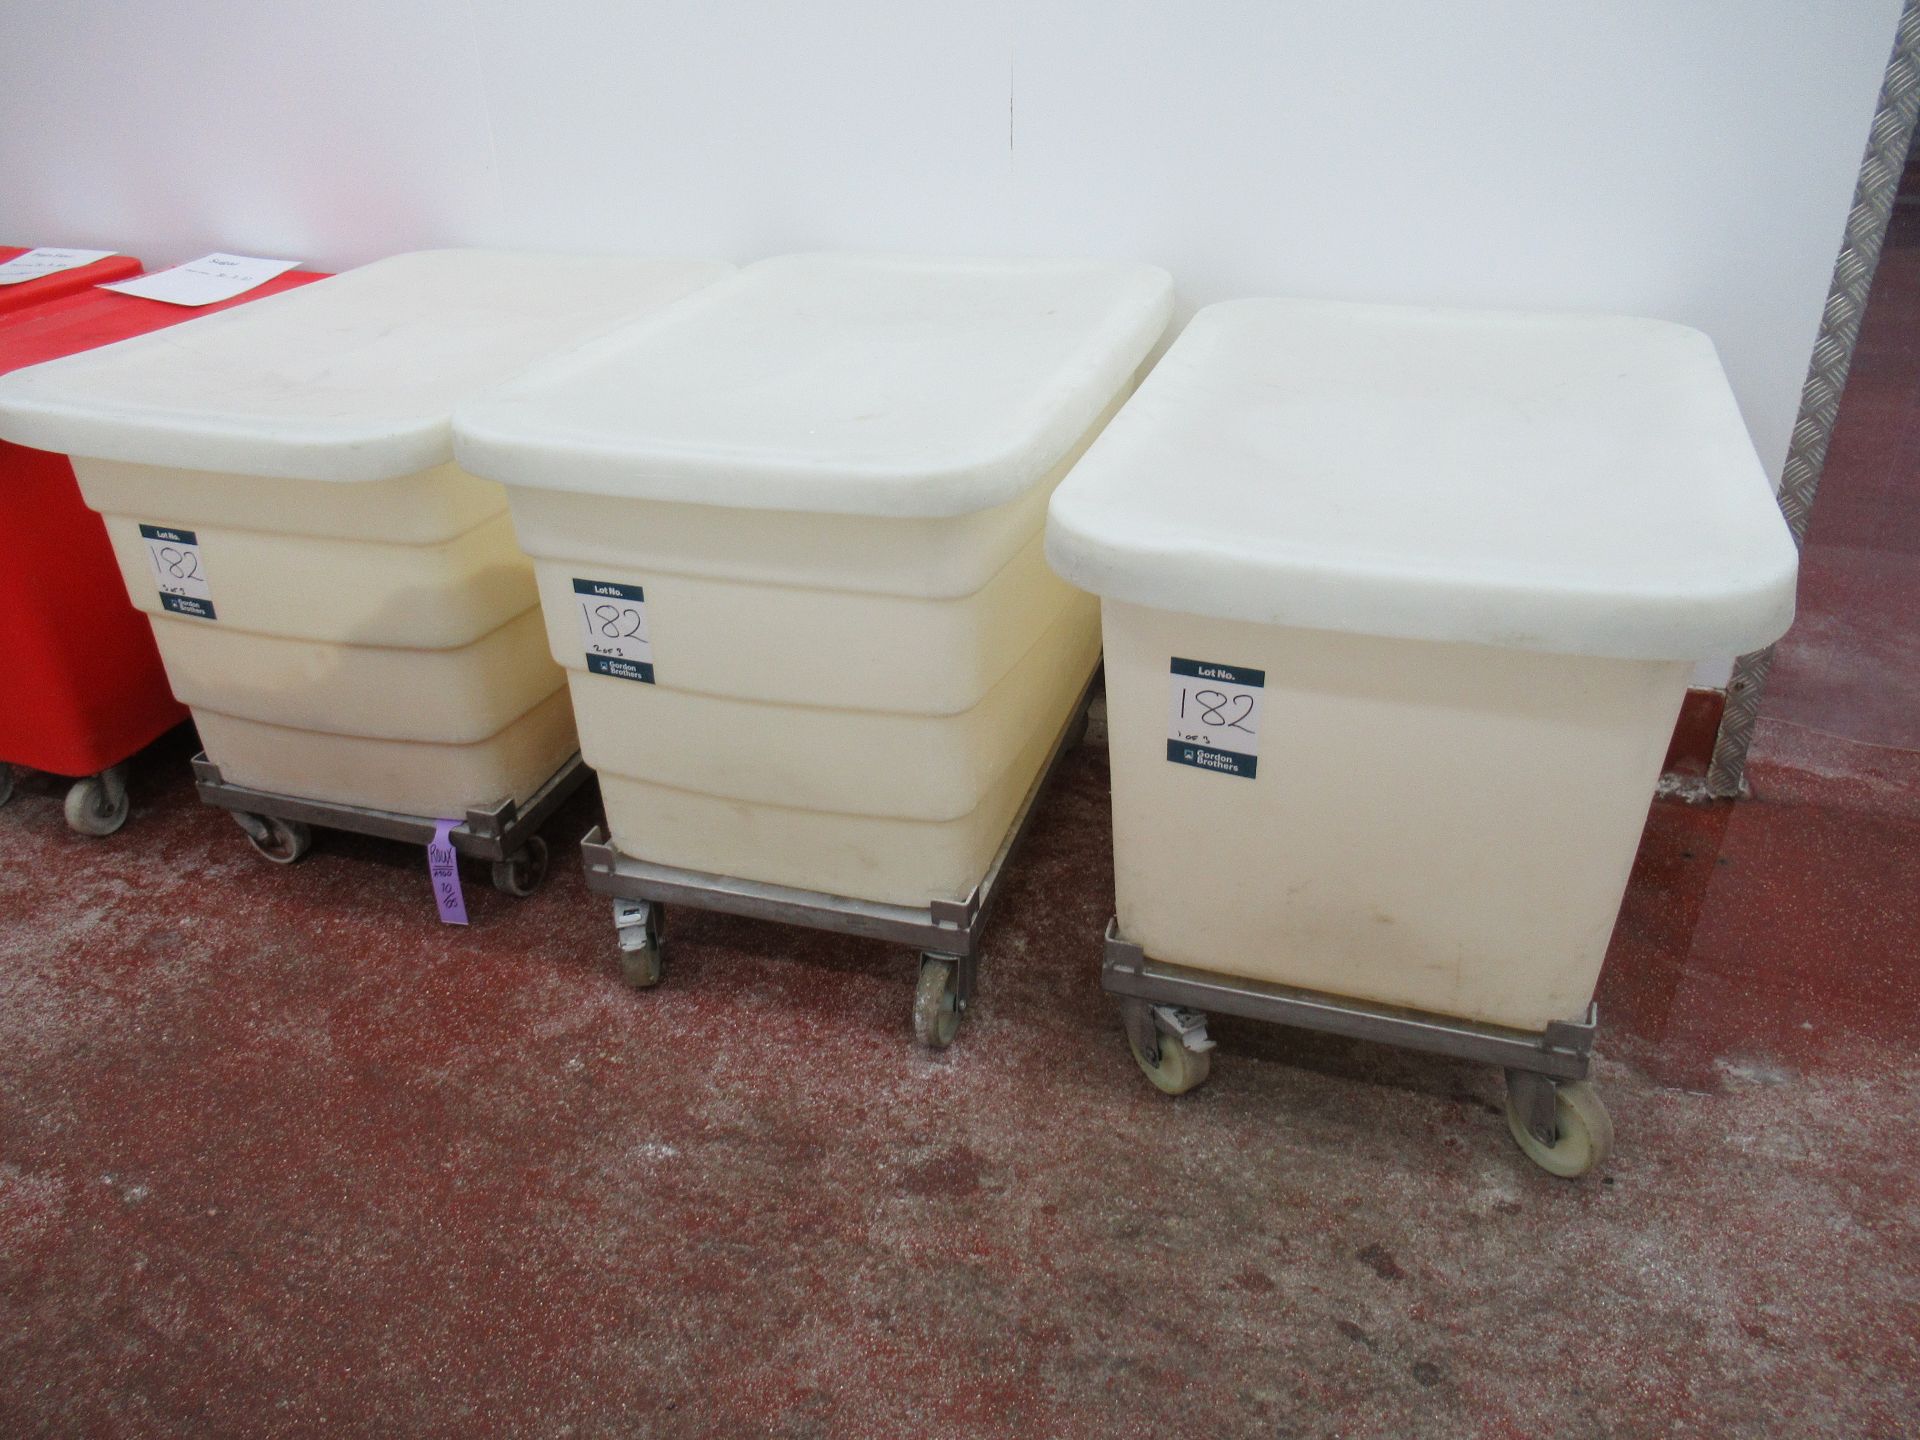 3 White plastic bins approximately 880 x 580 x 580mm deep on dollies with lids